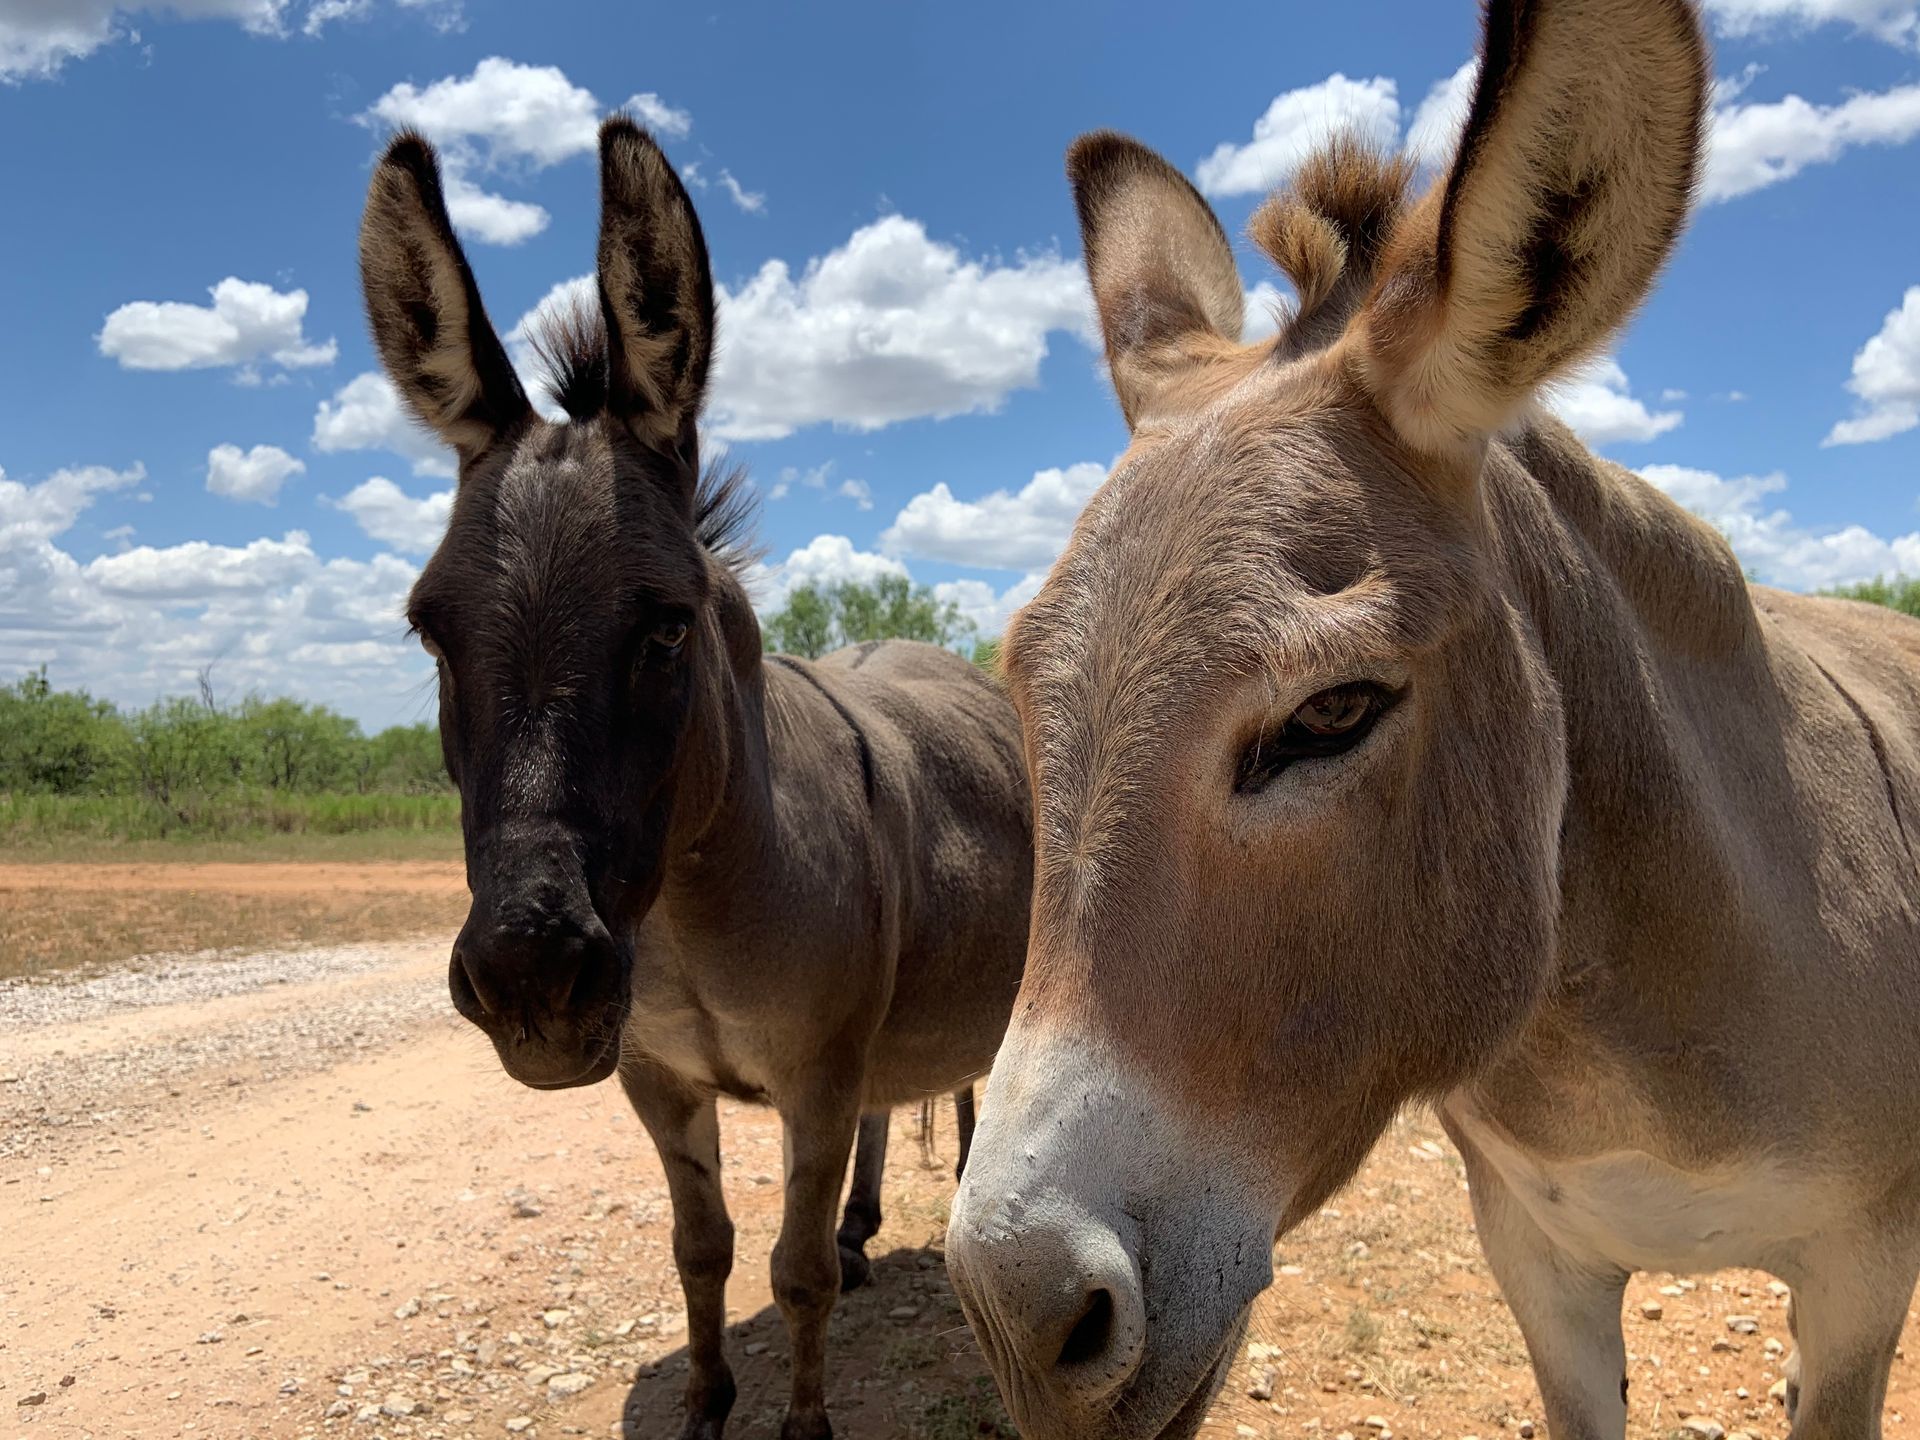 two donkeys are standing next to each other on a dirt road .